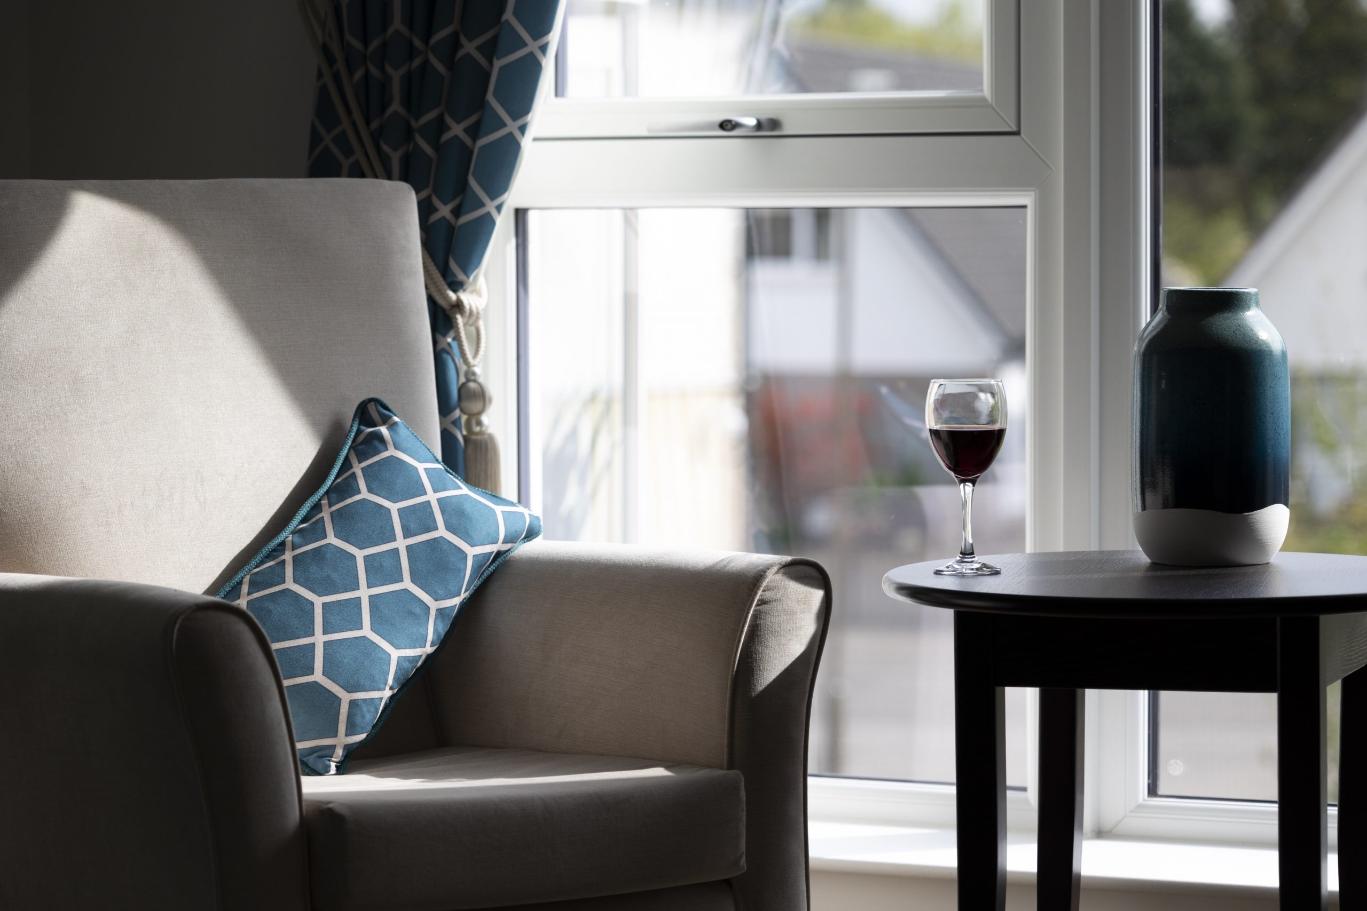 roselea-court-care-home-seating-with-wine